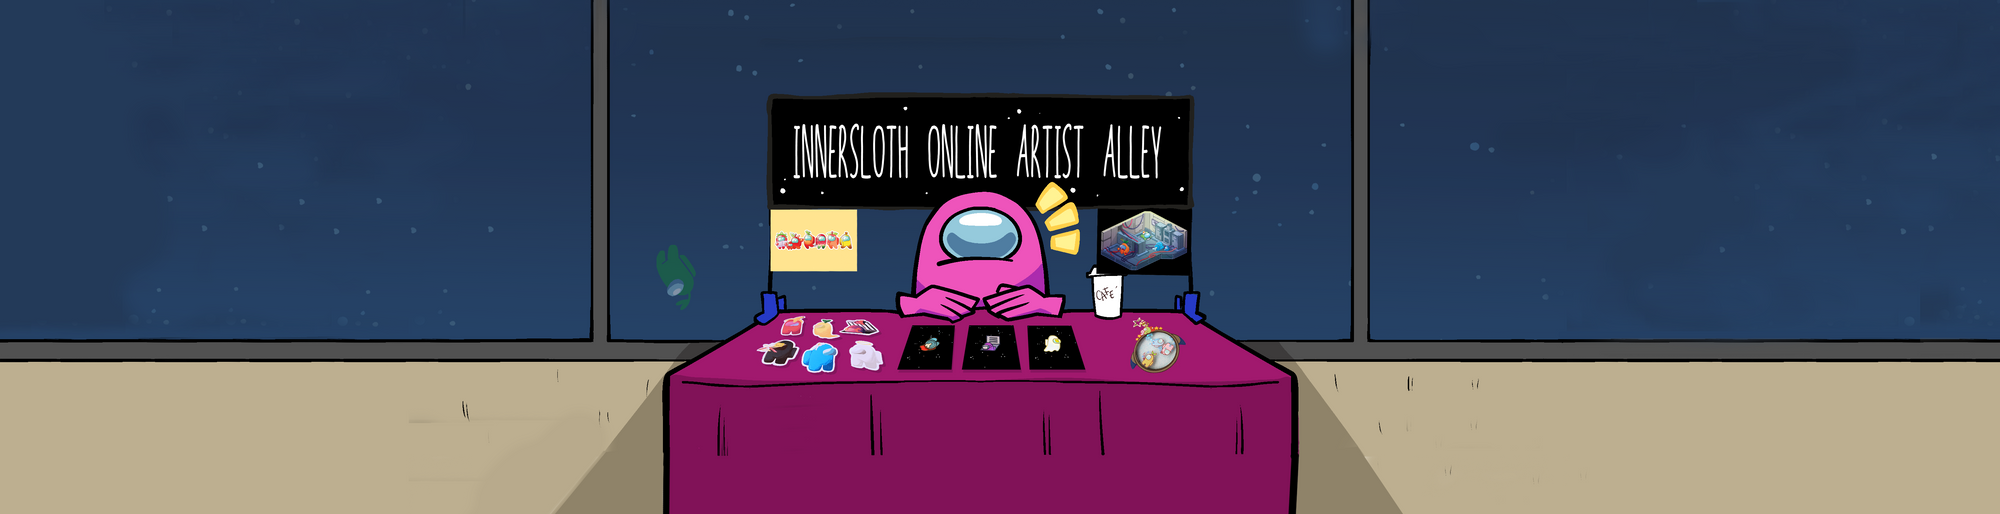 A pink crewmate sits at a convention table, selling various Among Us storefront wares. A banner above the crewmate reds "Innersloth Online Artist Alley".